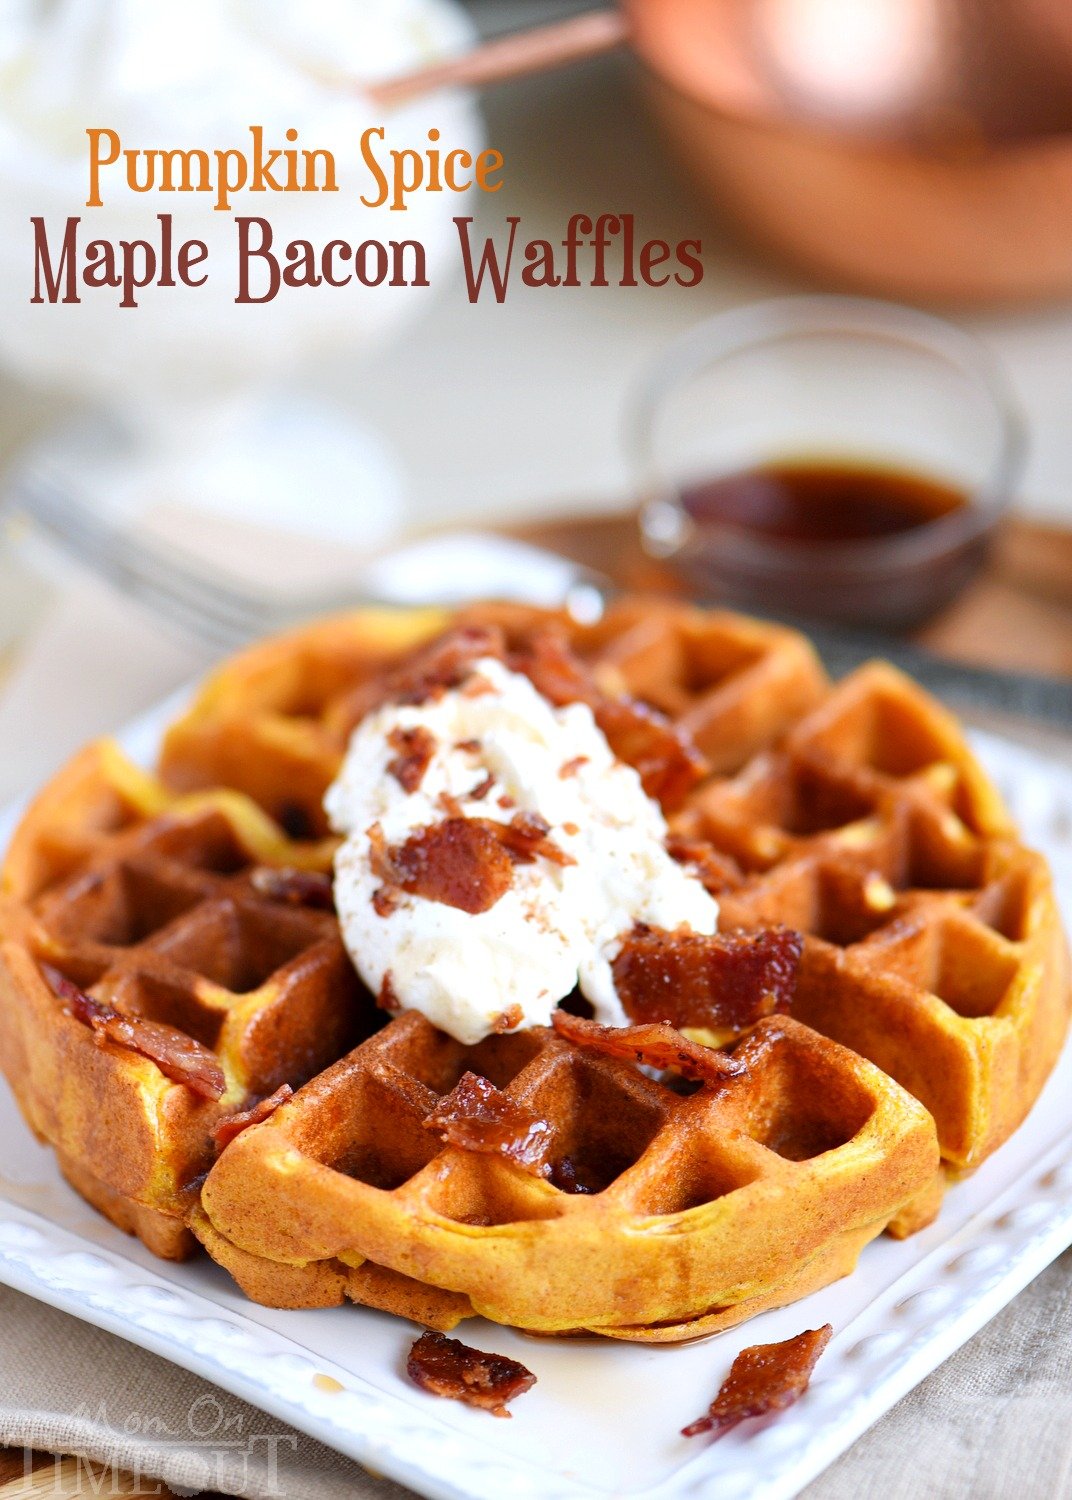 These Pumpkin Spice Maple Bacon Waffles are the perfect way to celebrate the most important meal of the day! Great for the holidays and all fall long! You're going to love the spiced maple bacon that's inside each waffle - so good! // Mom On Timeout (Sponsored by Hungry Jack)